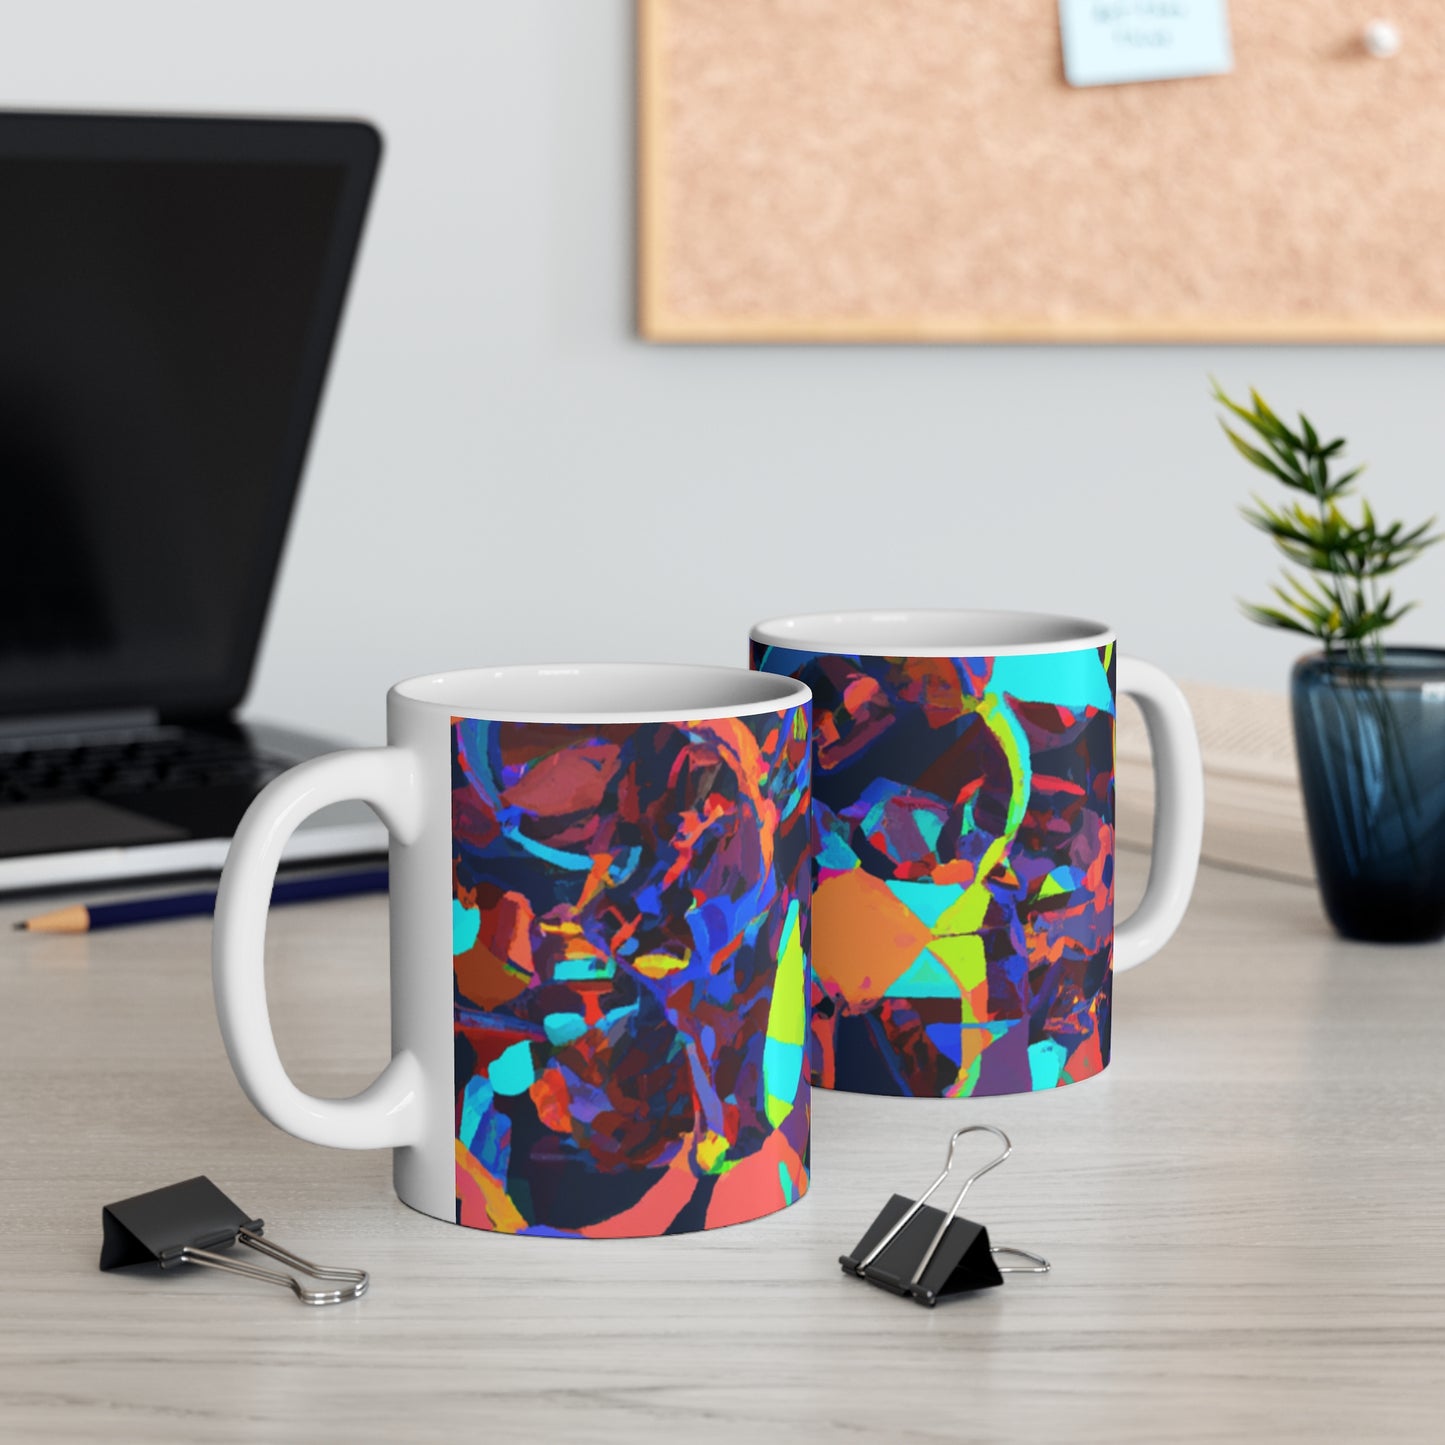 Oliver's Java Roast - Psychedelic Coffee Cup Mug 11 Ounce